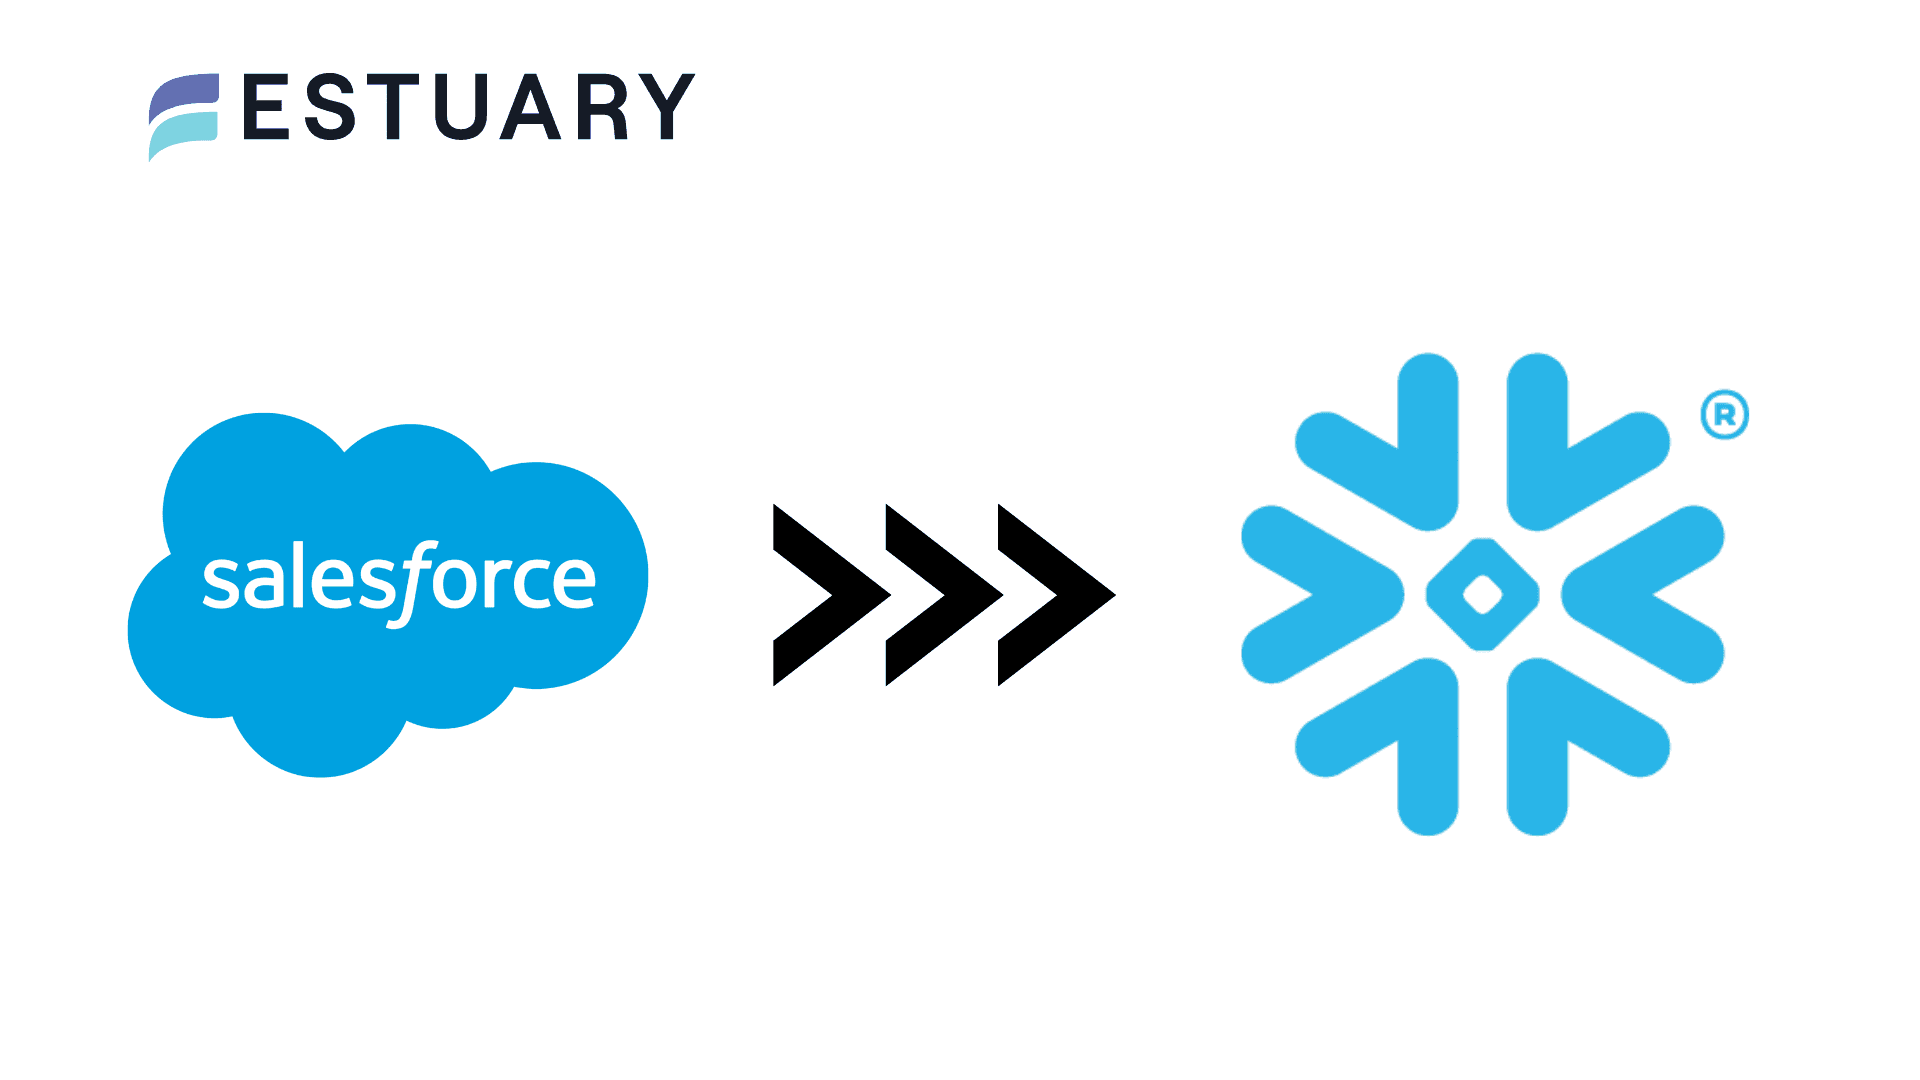 How to Connect & Load Data From Salesforce to Snowflake: 4 Methods